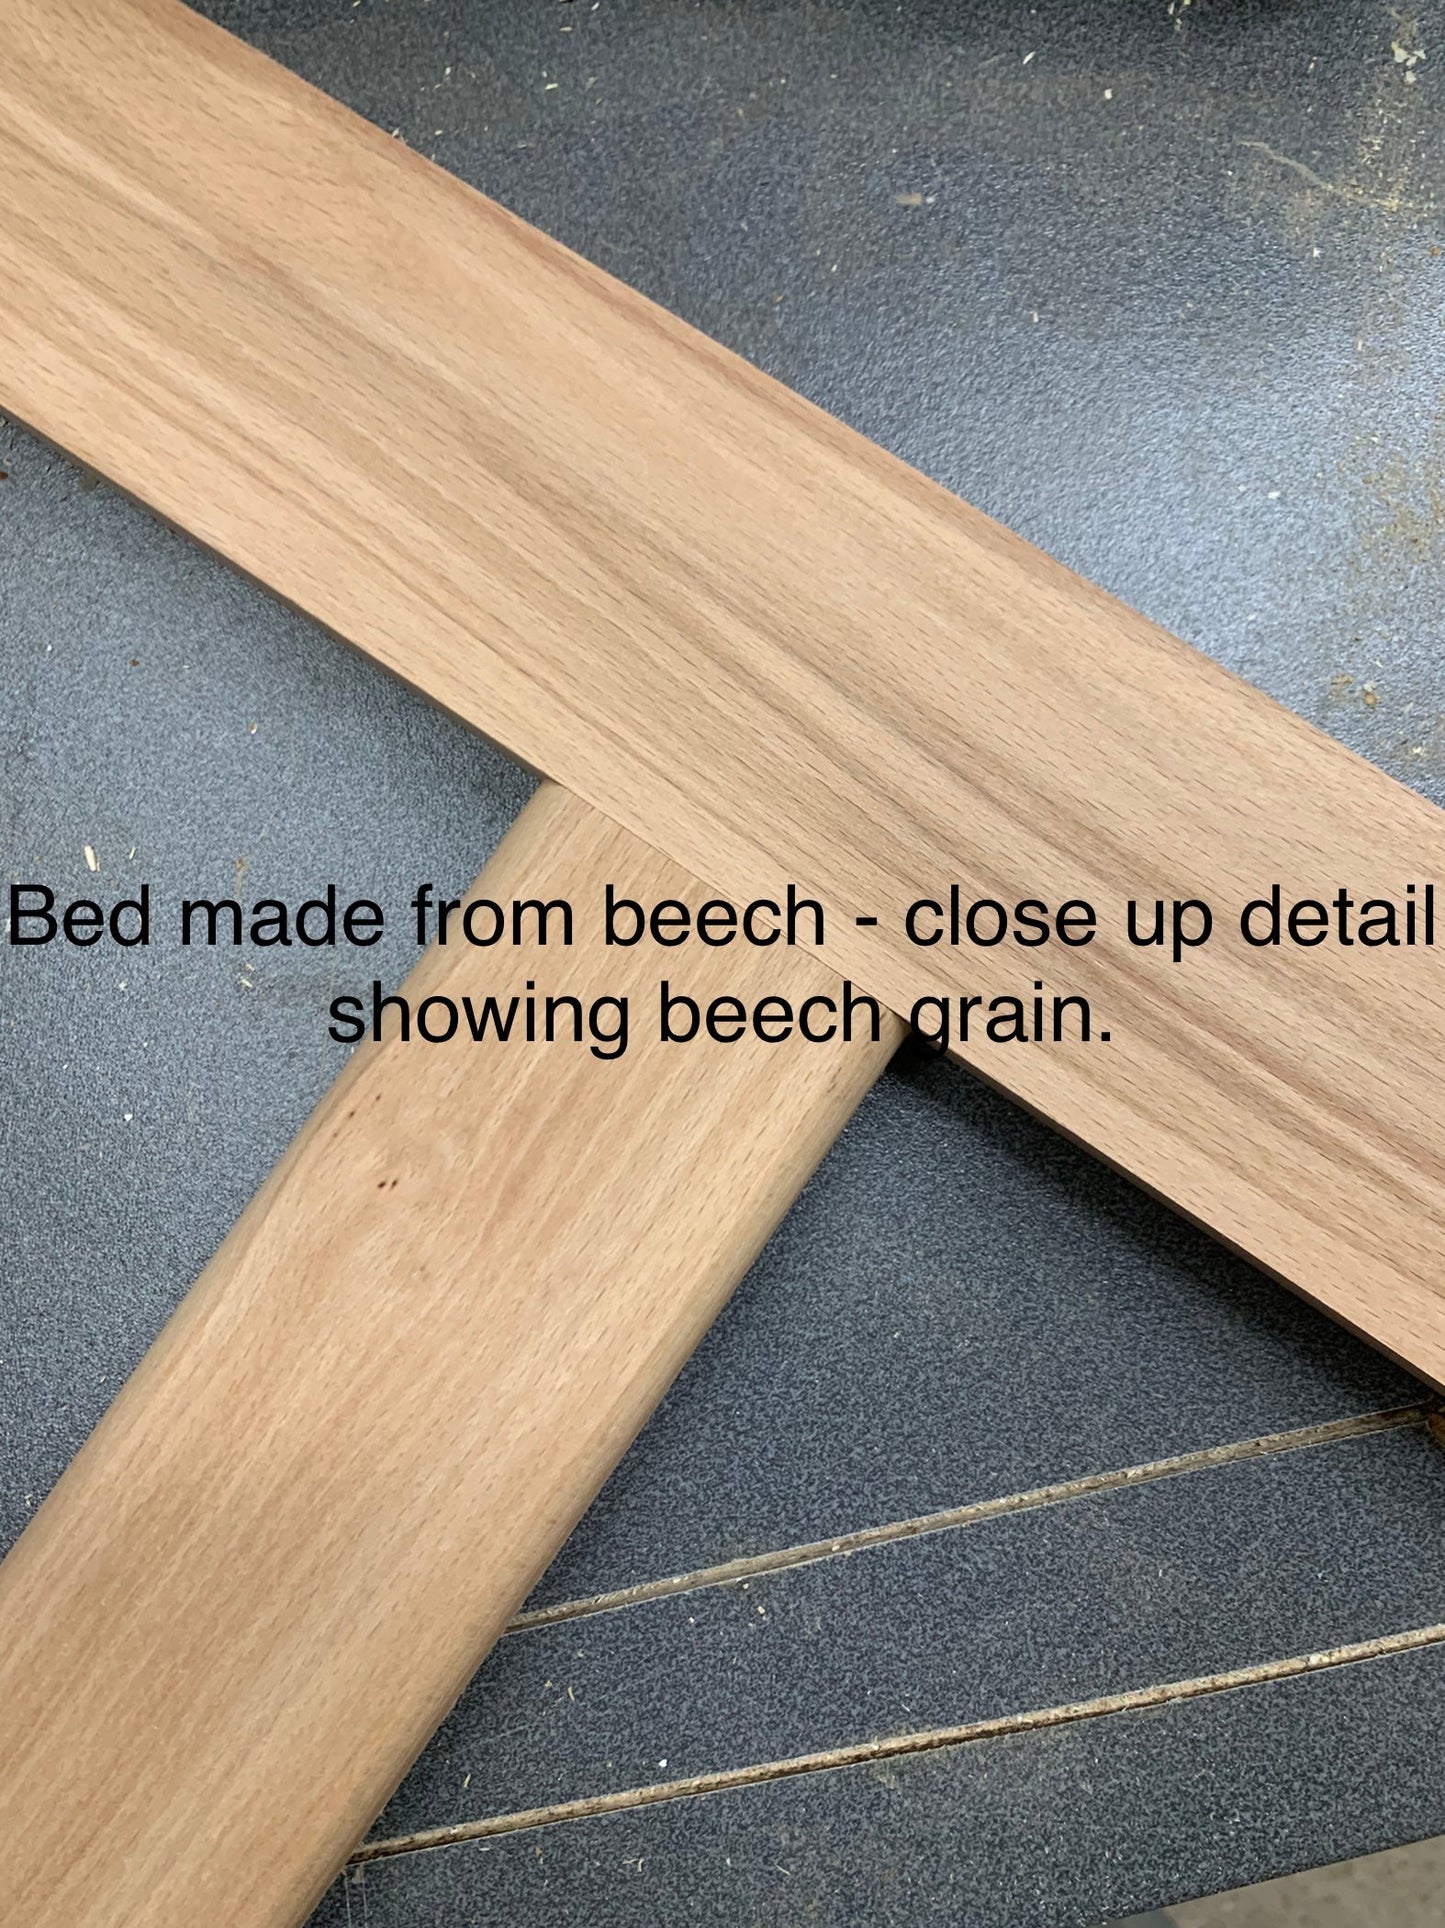 Deposit on a Montessori bed in beech | toddler floor bed | kids bed frame | co-sleeping bed.  Made To Order To Your Specification